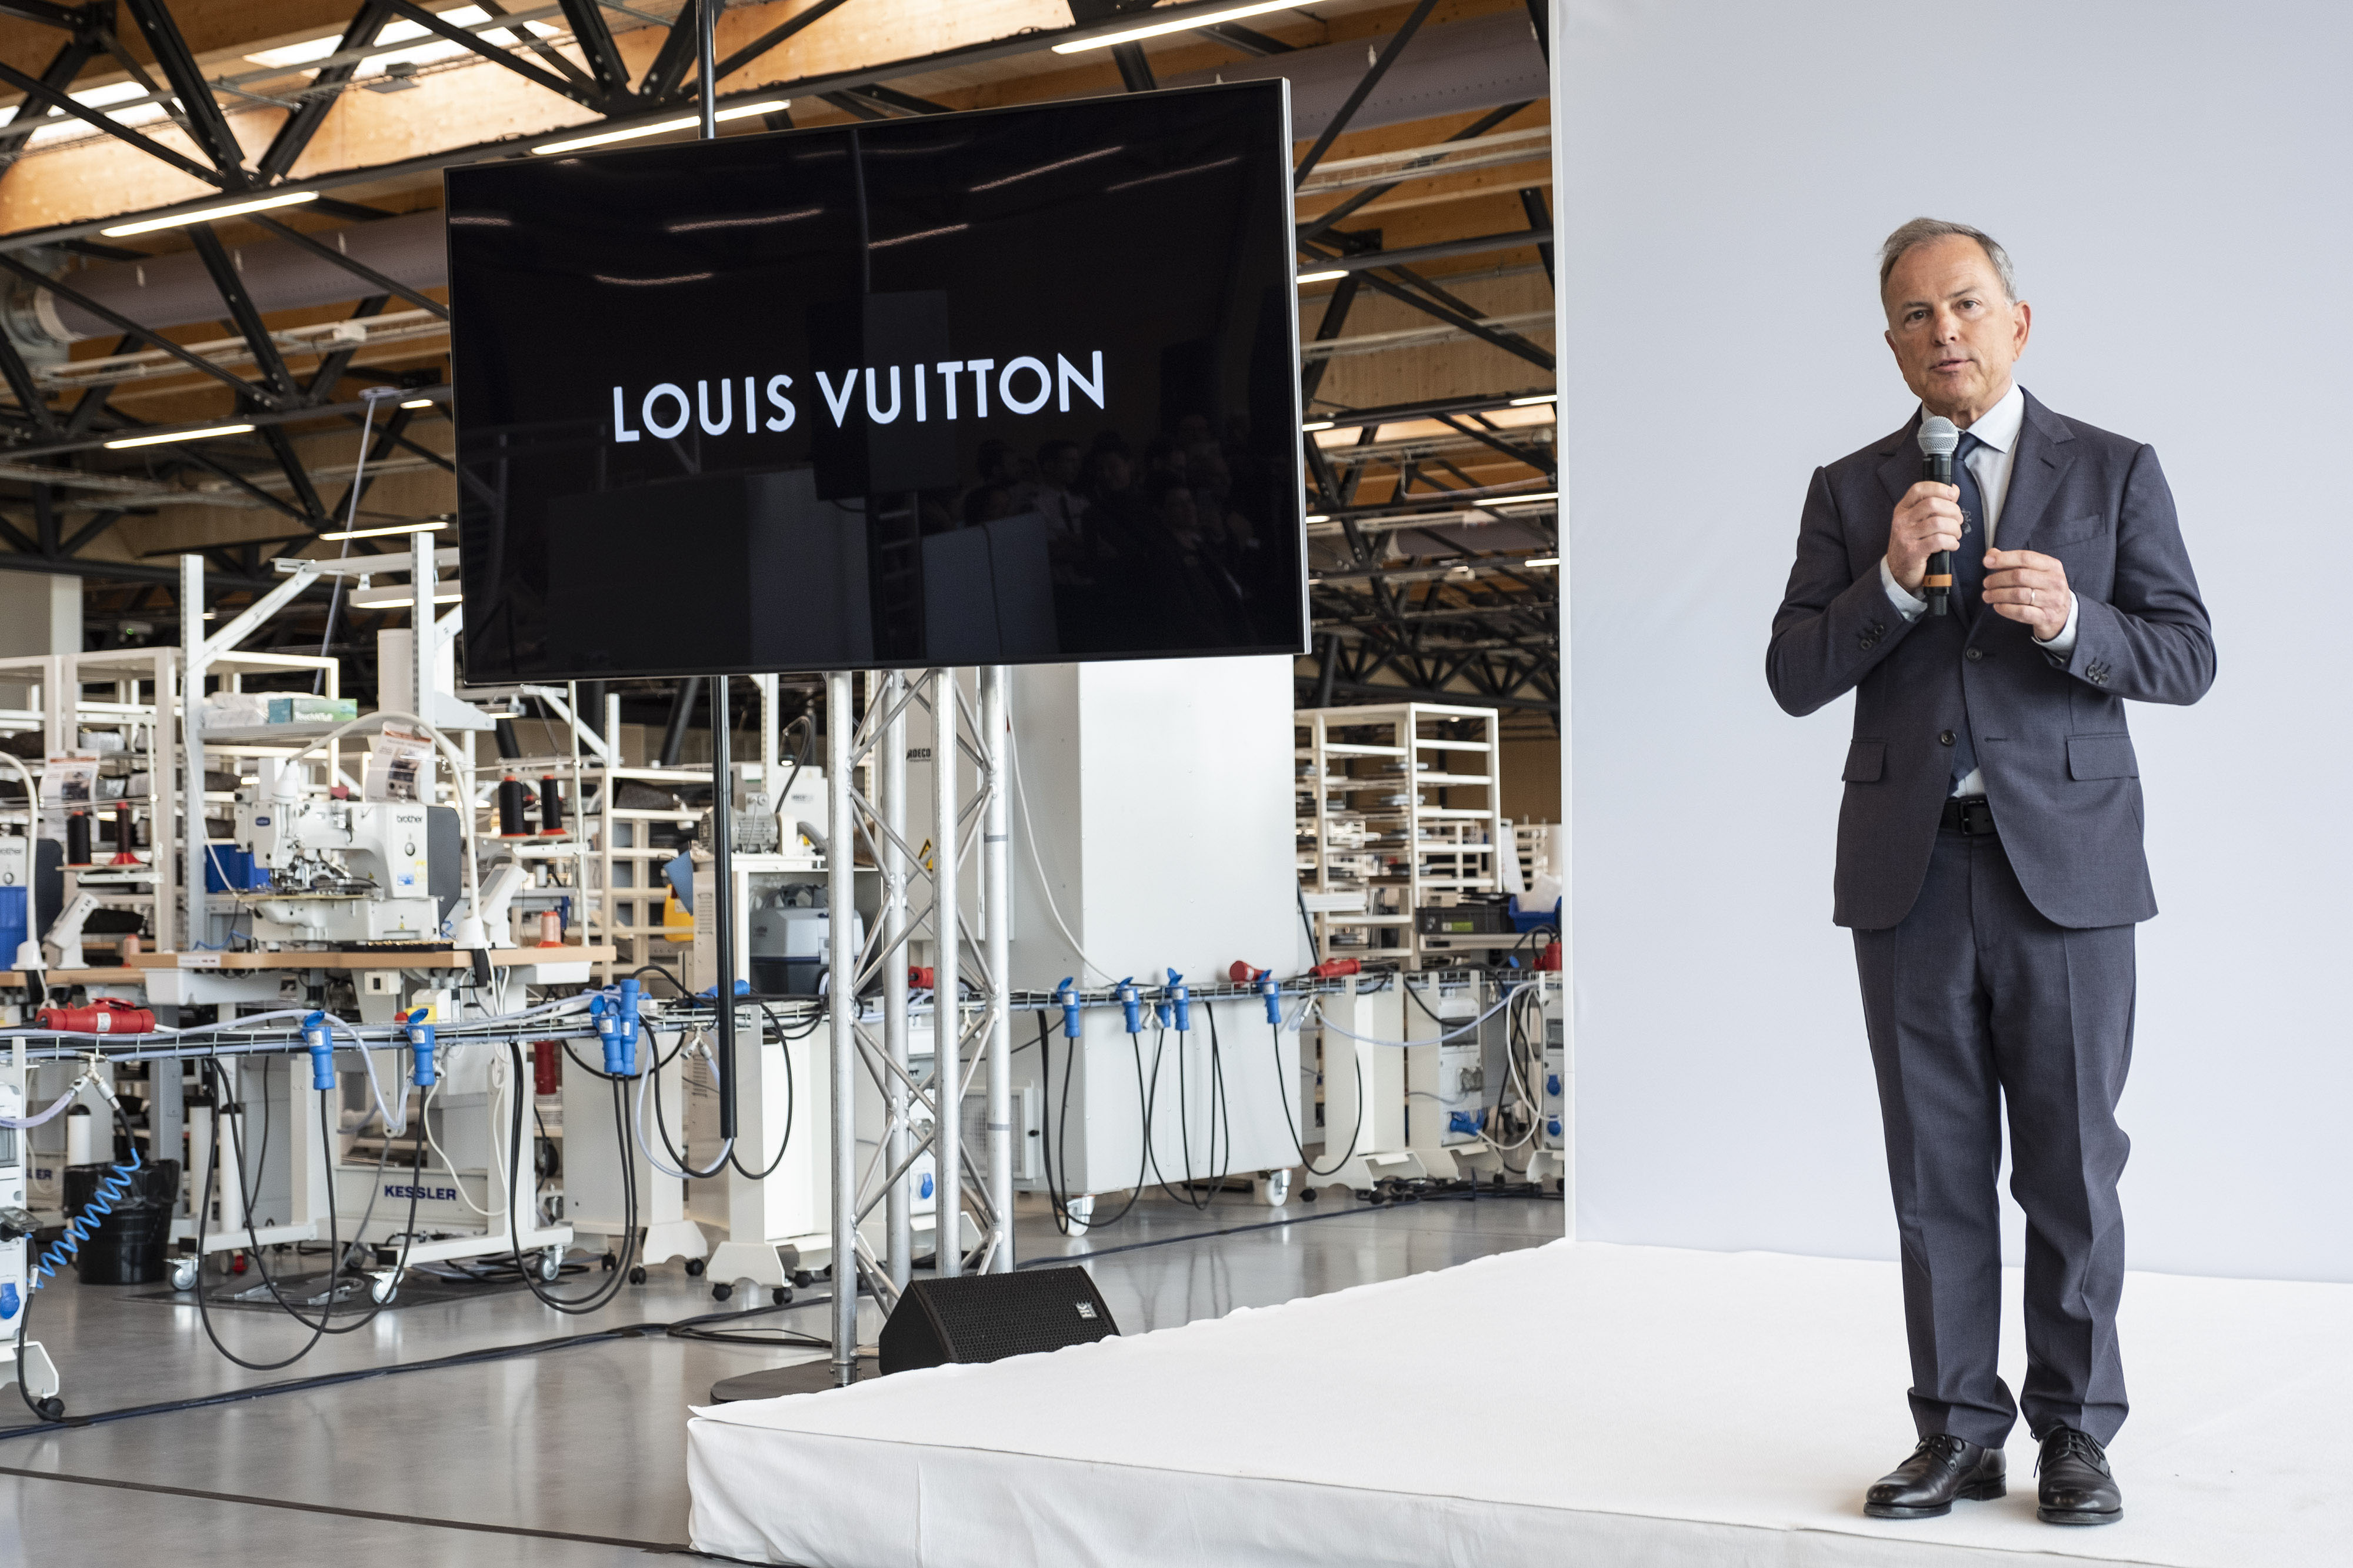 Louis Vuitton's Michael Burke Set to Replace Toledano at LVMH Fashion Group  - Bloomberg